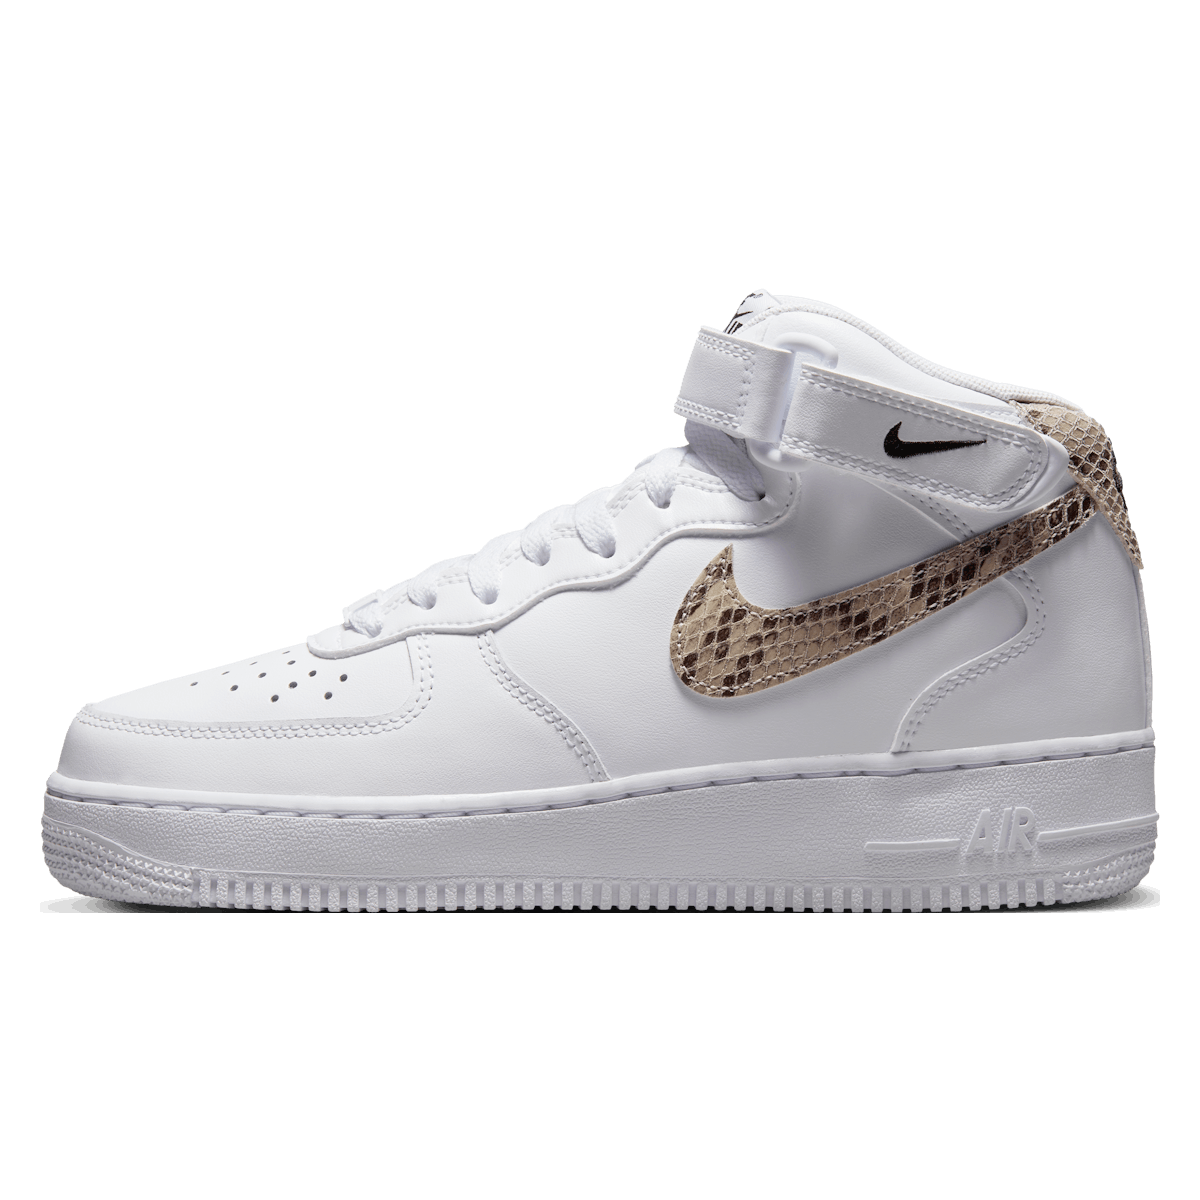 Nike Air Force 1 '07 Mid Wmns "Snakeskin"